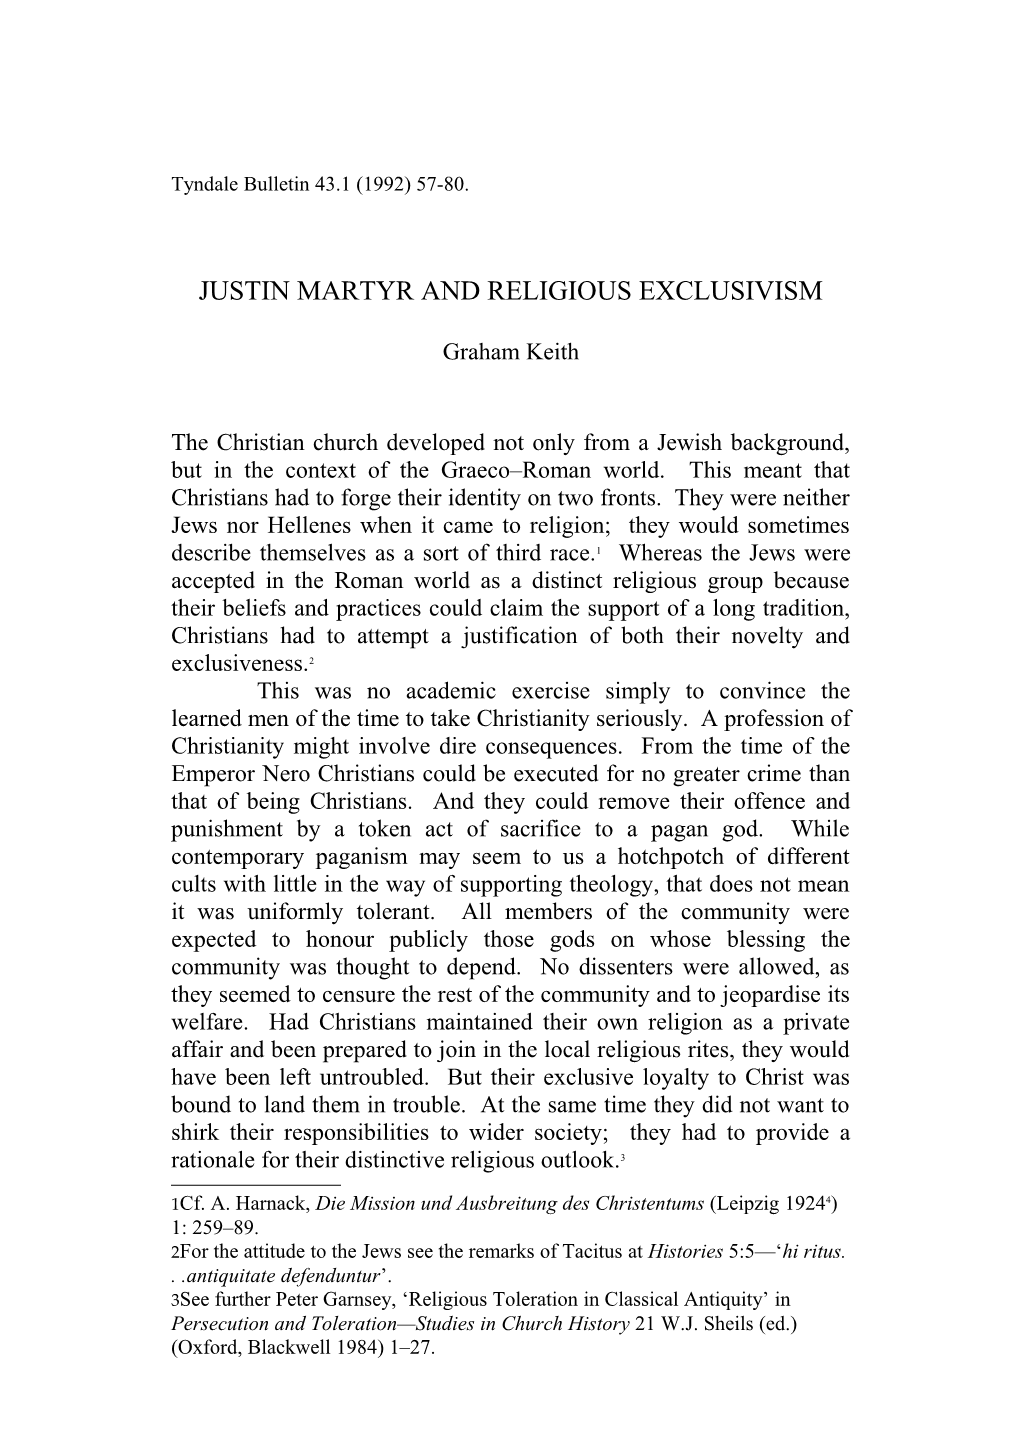 Justin Martyr and Religious Exclusivism